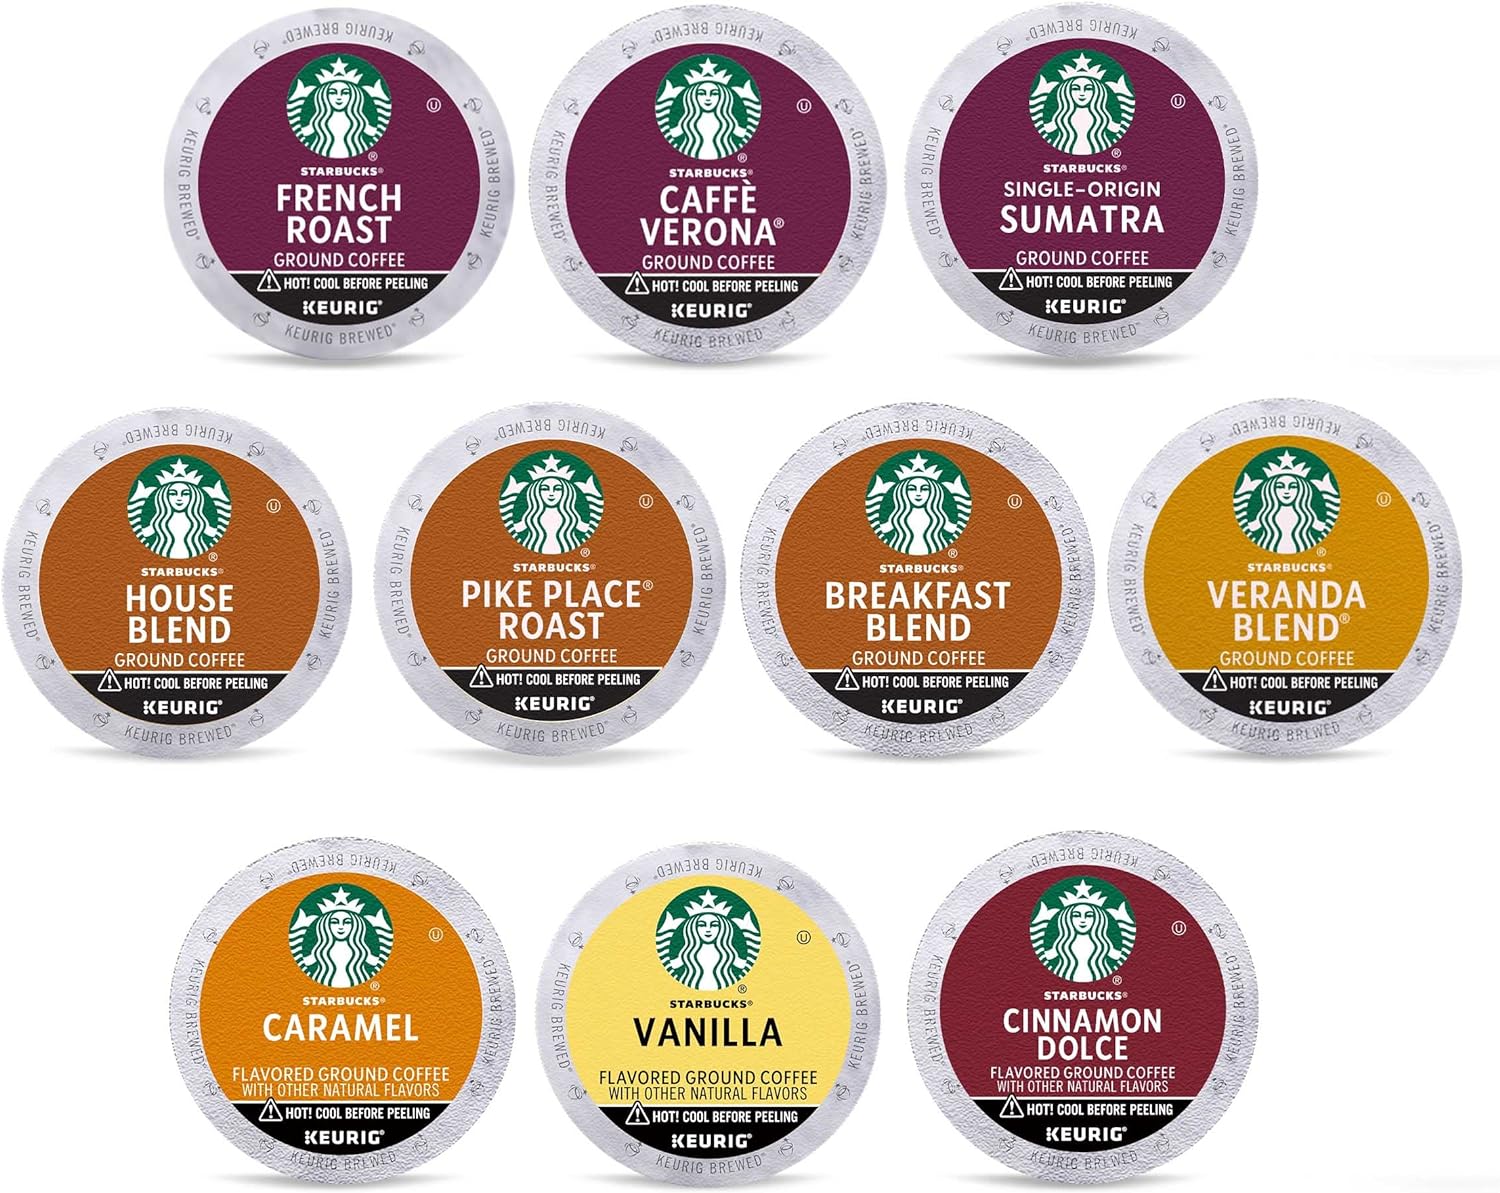 Selection of K-cups coffee machine pods from Starbucks